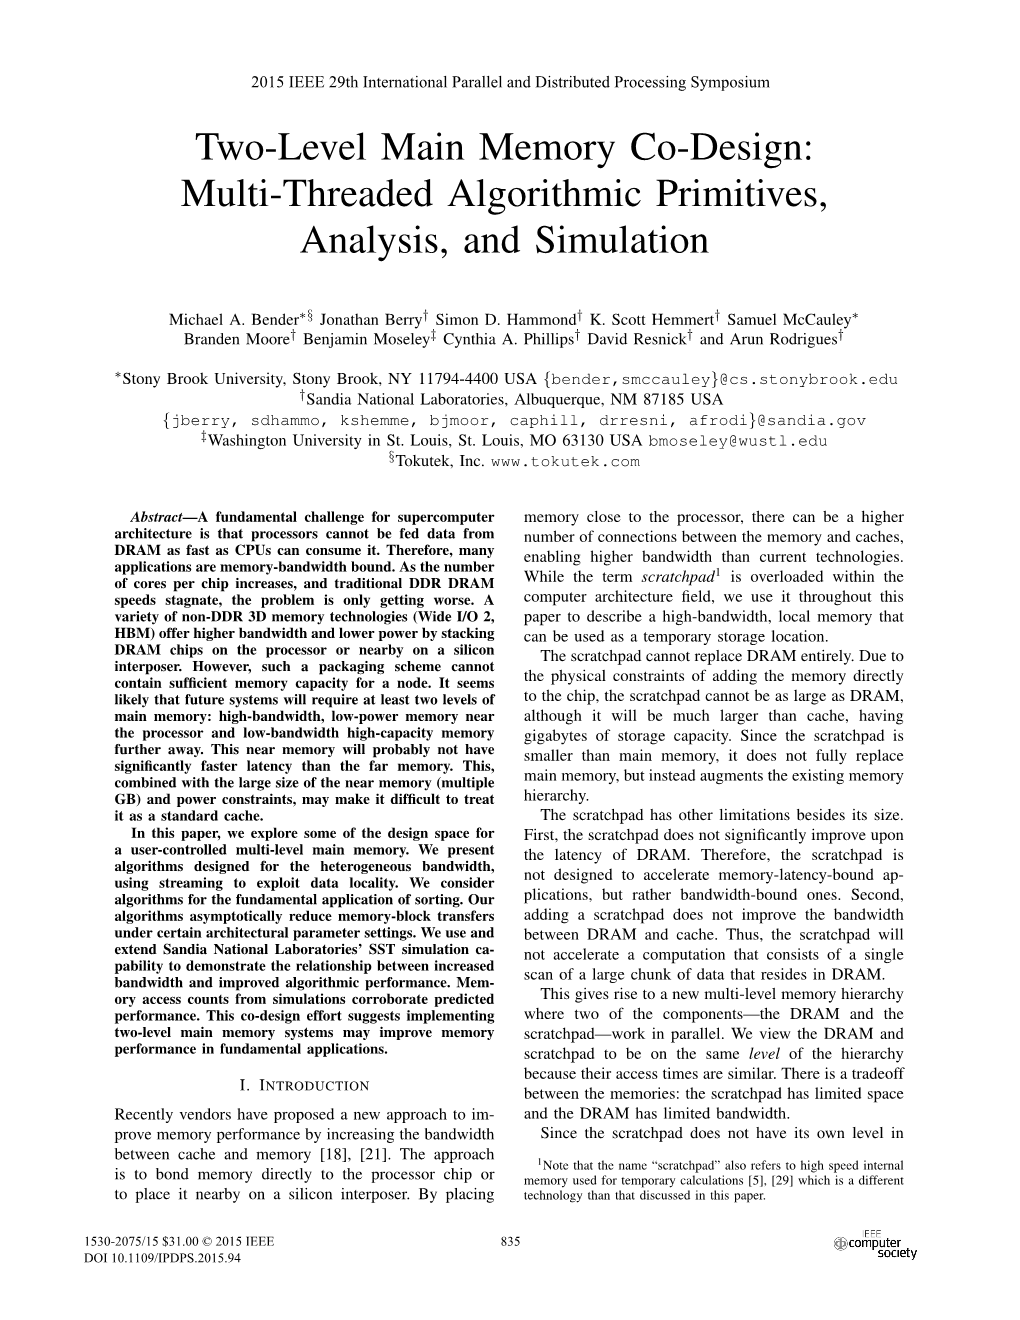 Two-Level Main Memory Co-Design: Multi-Threaded Algorithmic Primitives, Analysis, and Simulation